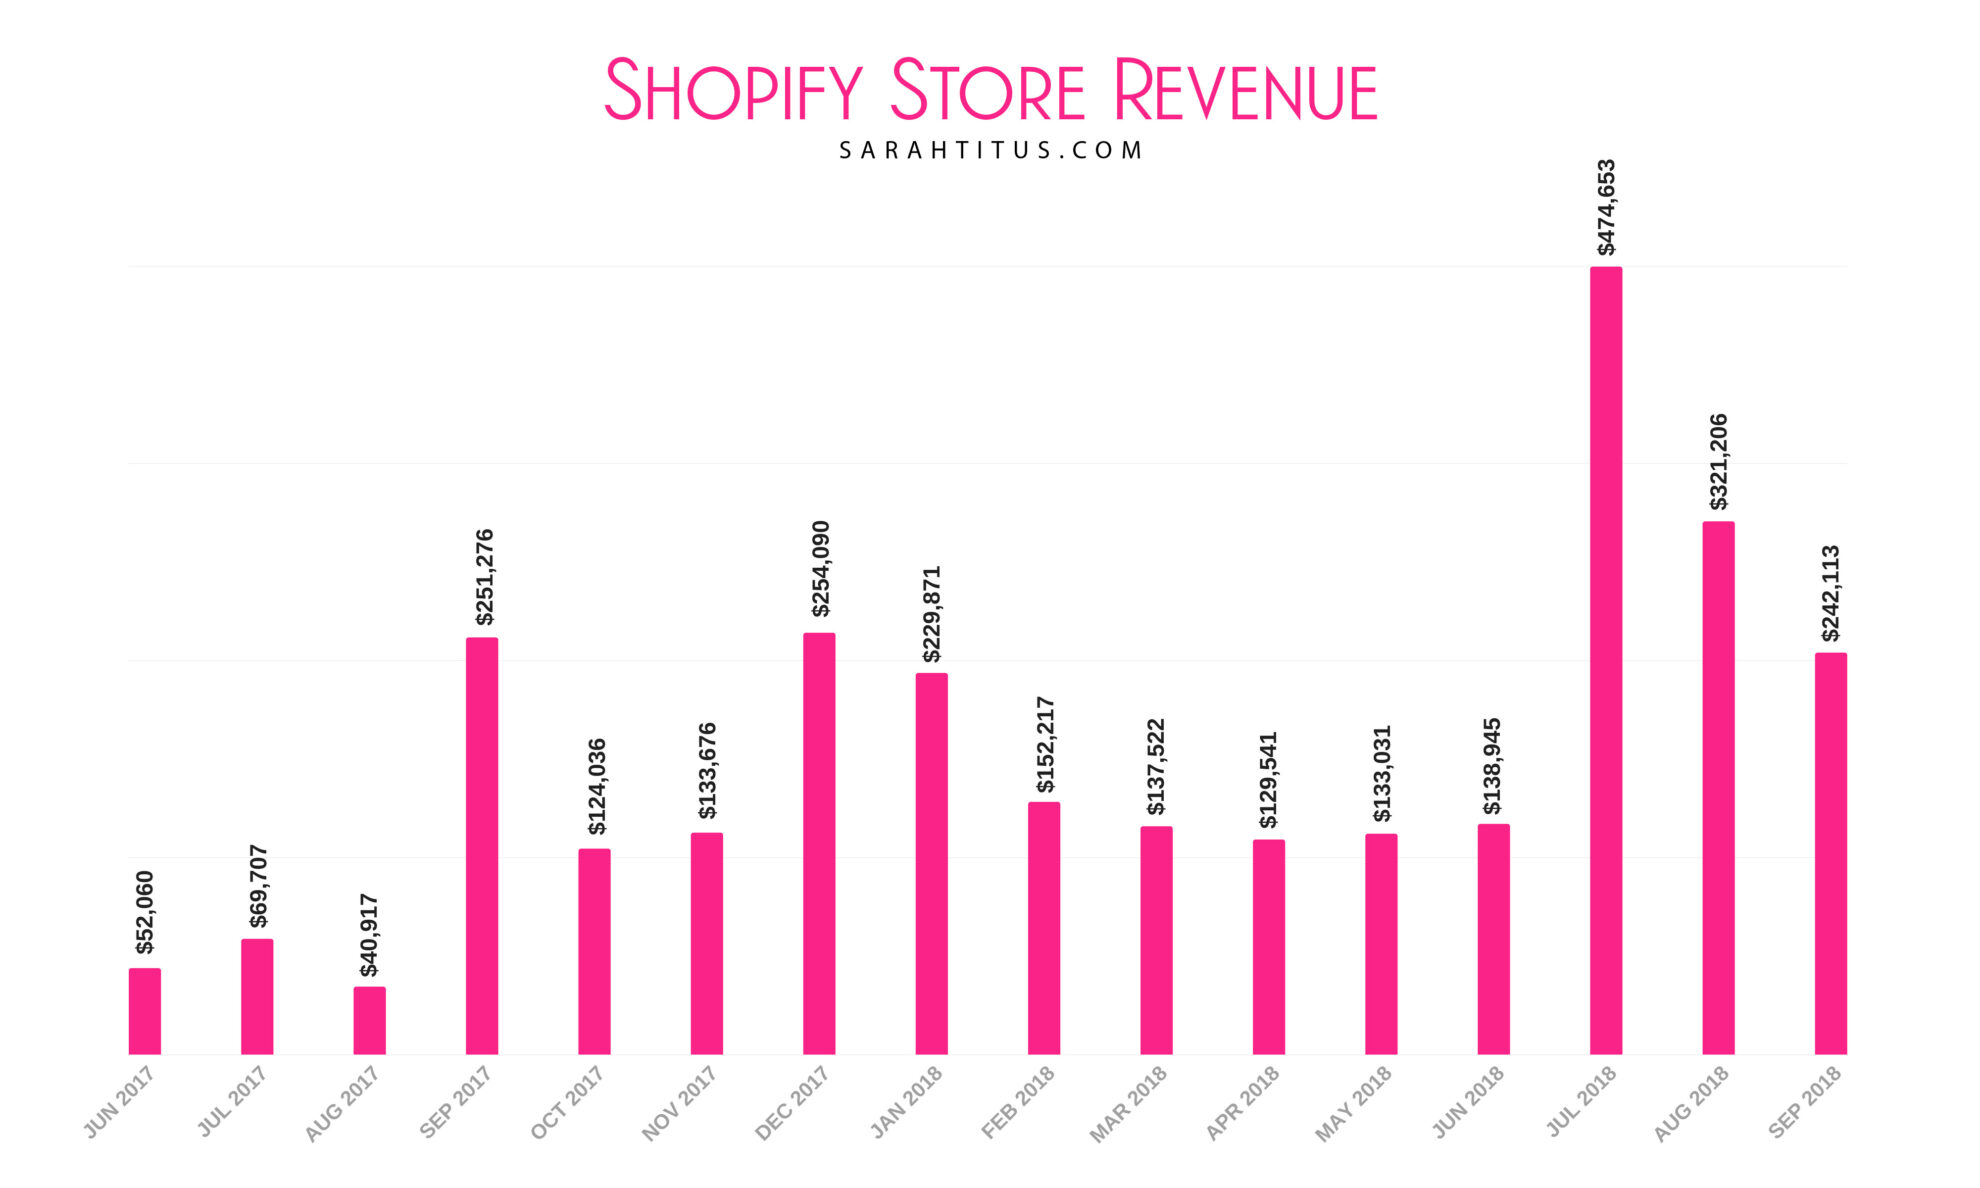 If you're asking yourself about how to make money on Shopify, you're in the right place! My first month on Shopify I made $52,060 and now I make $2.4 million dollars a year in revenue! #shopify #ecommerce #printables #incomereport #incomereports #shopifyincomereports